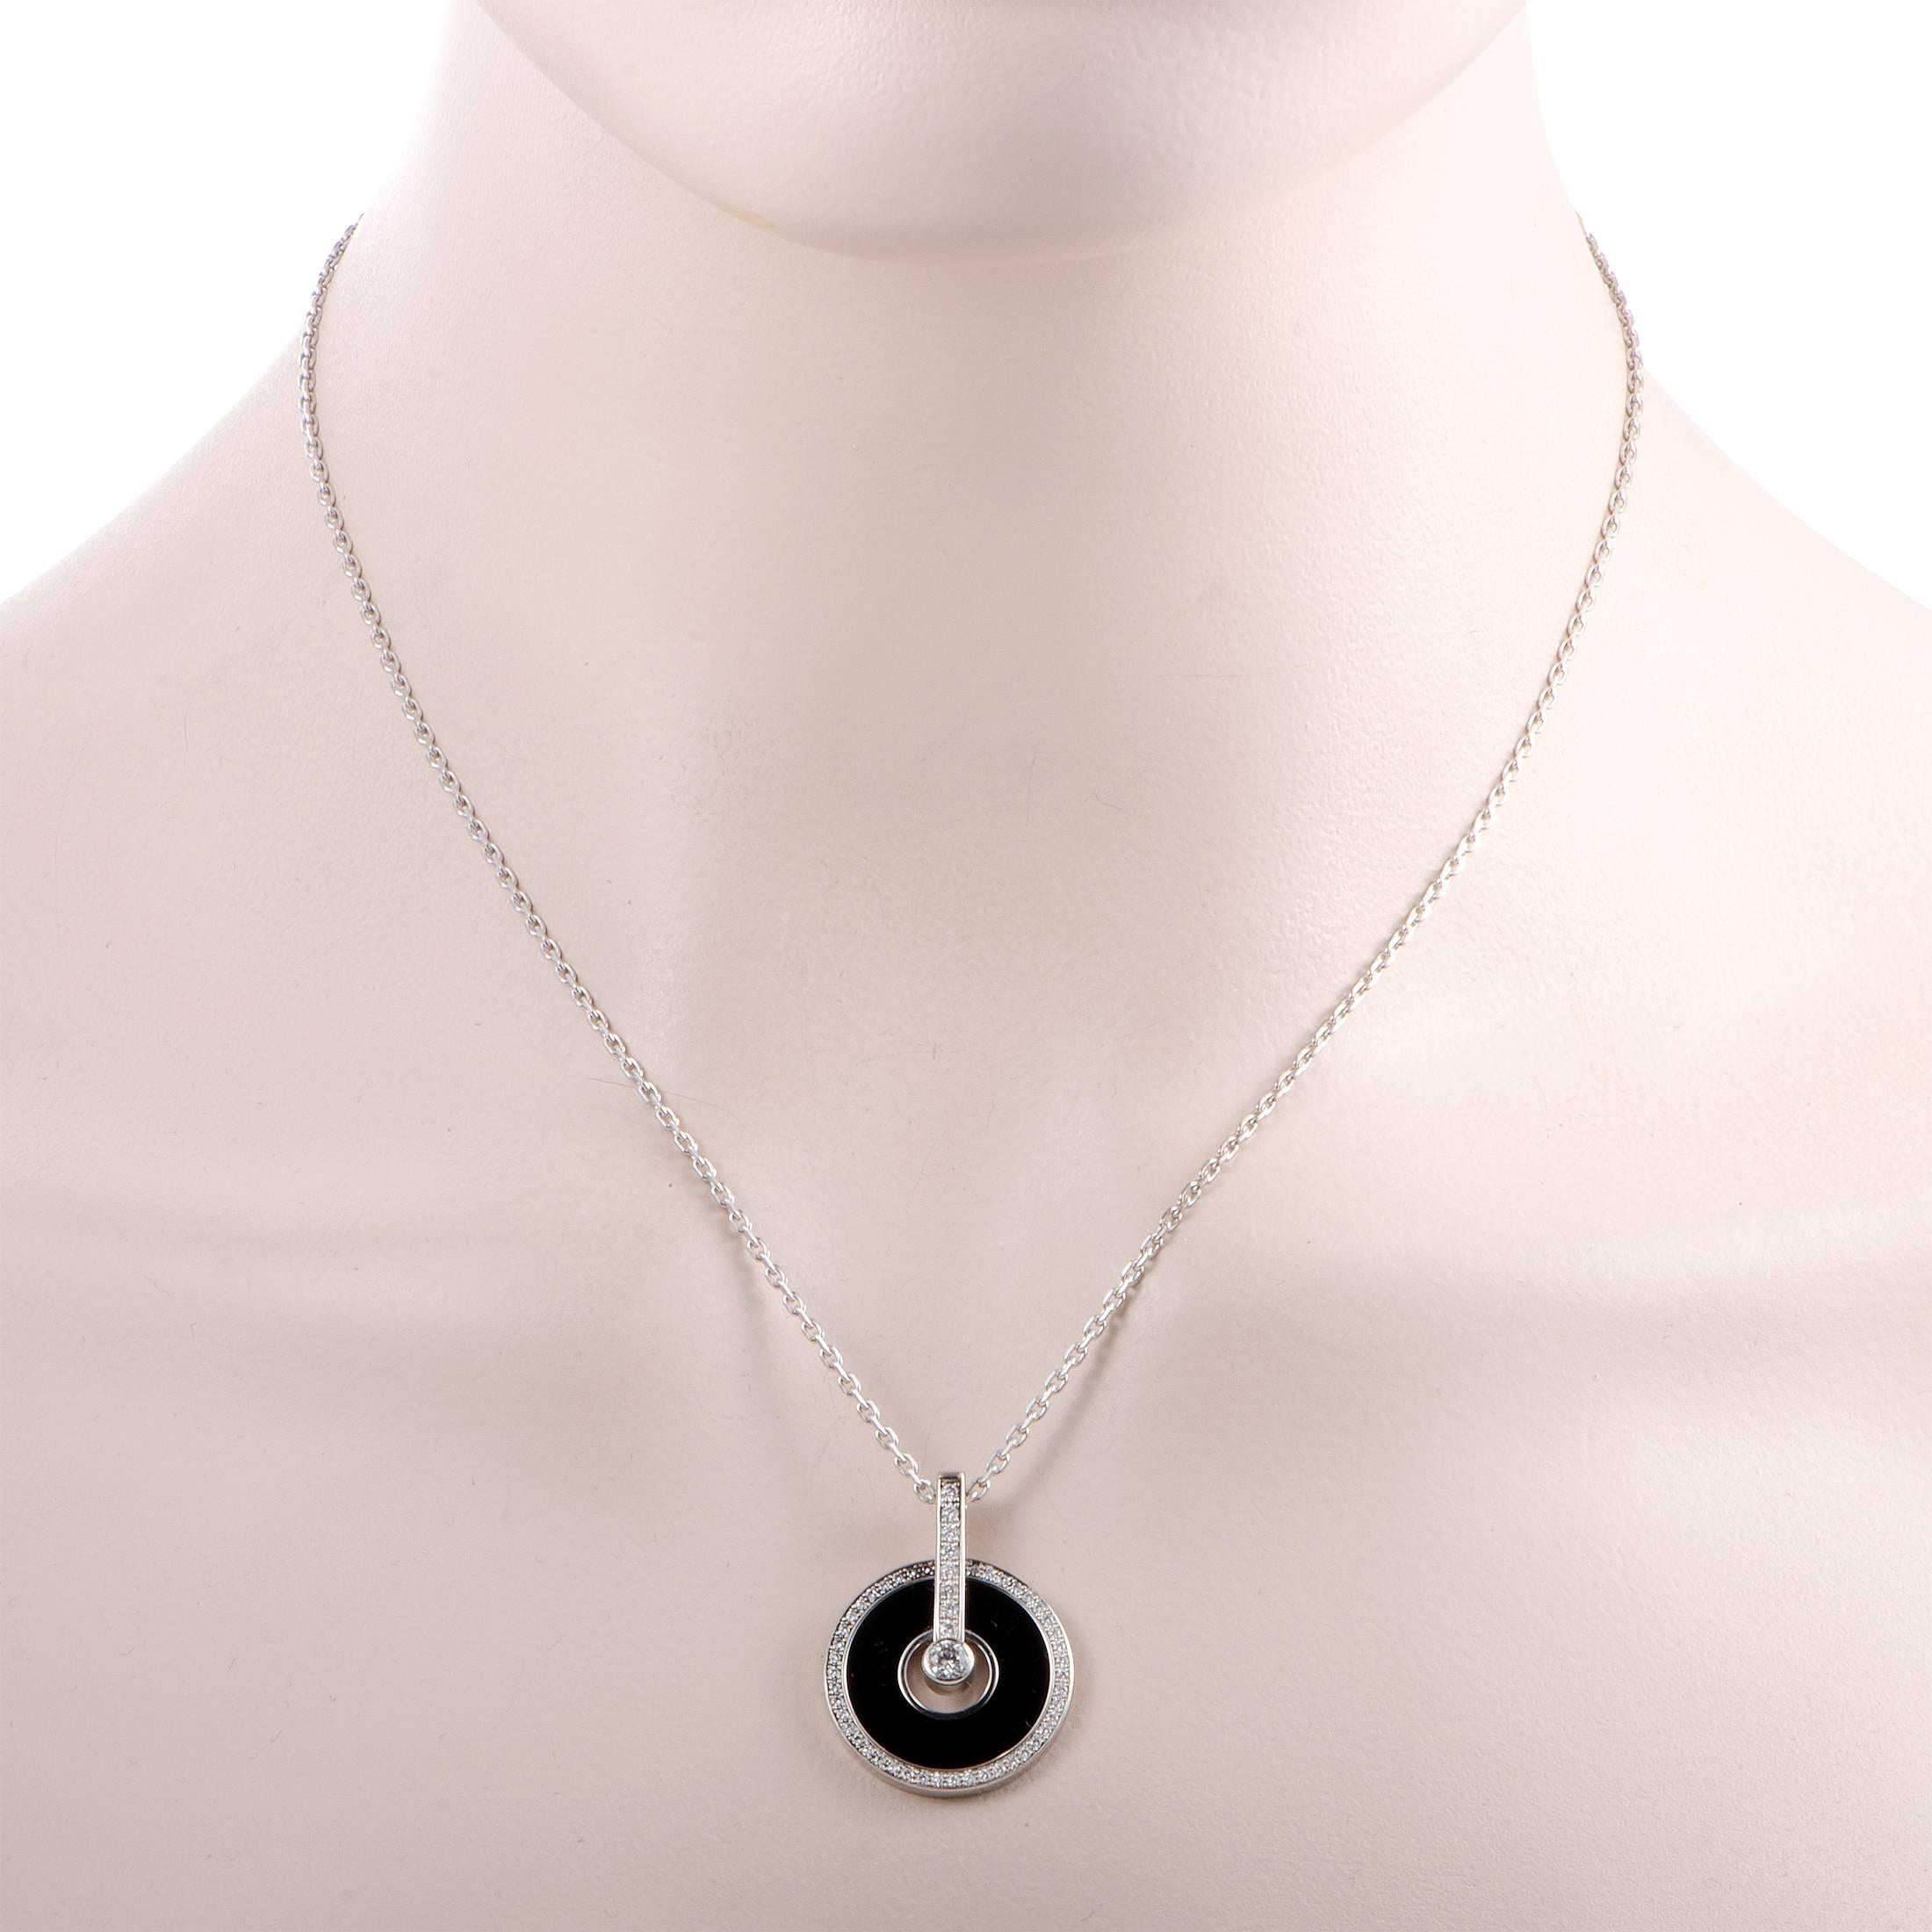 Extravagantly designed in classy 18K white gold, this unique pendant necklace by Piaget from the Limelight collection is truly spectacular! The incredible pendant features 0.65ct of sparkling diamonds and bold black onyx in its stunning design. A